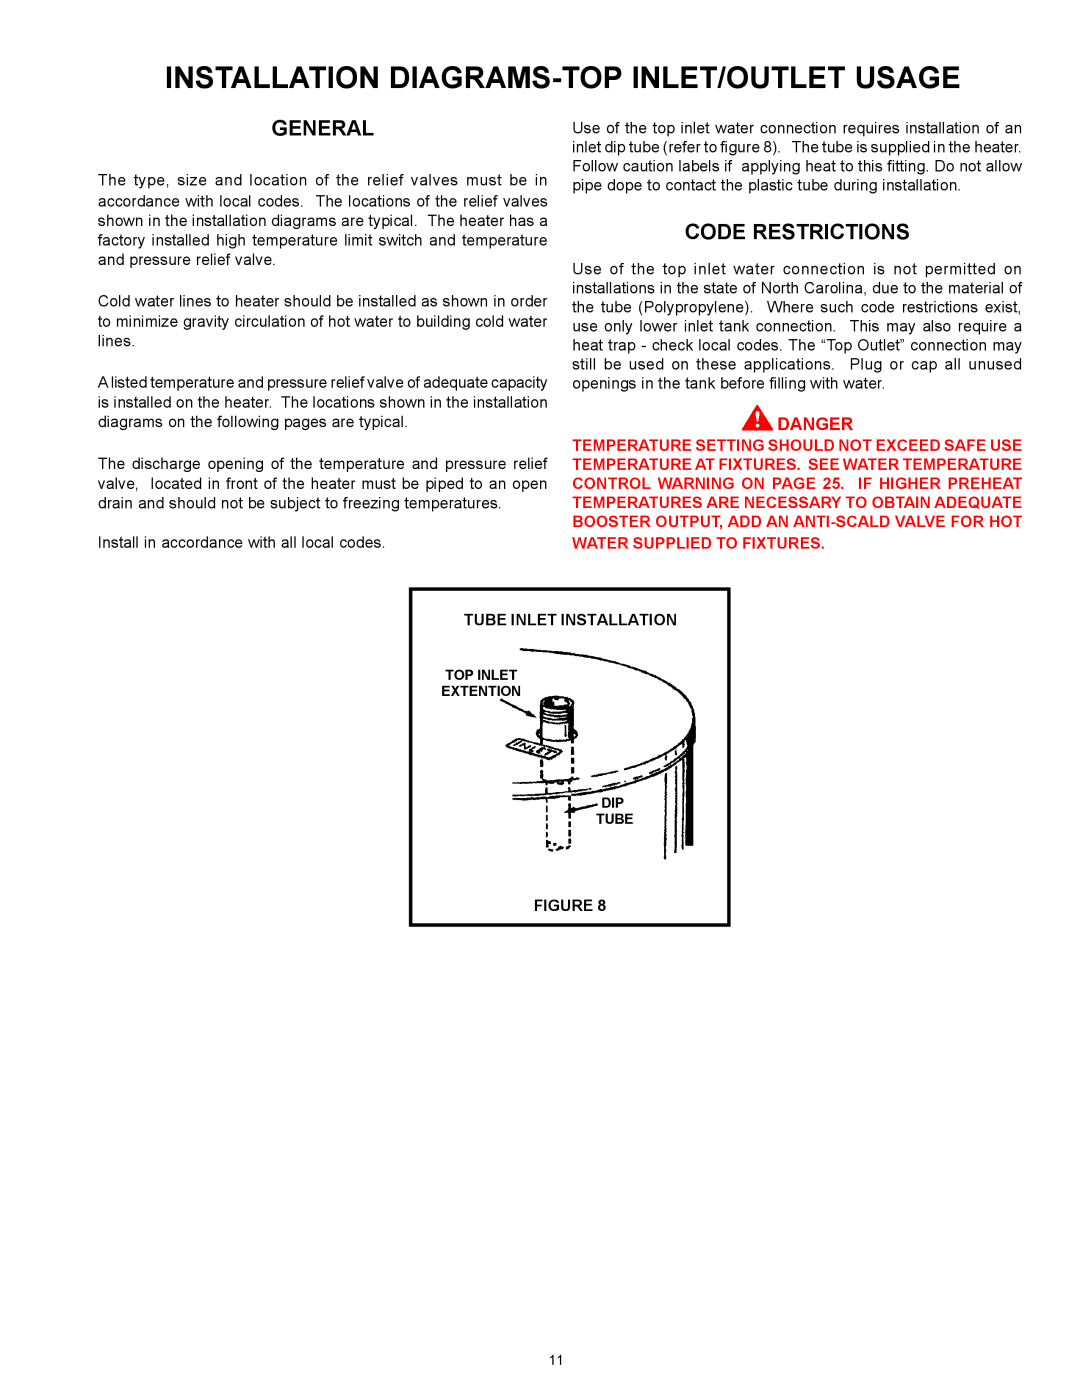 American Water Heater Commercial Gas, Glass-Lined, Tank-Type Water Heater Installation Diagrams-Top Inlet/Outlet Usage 